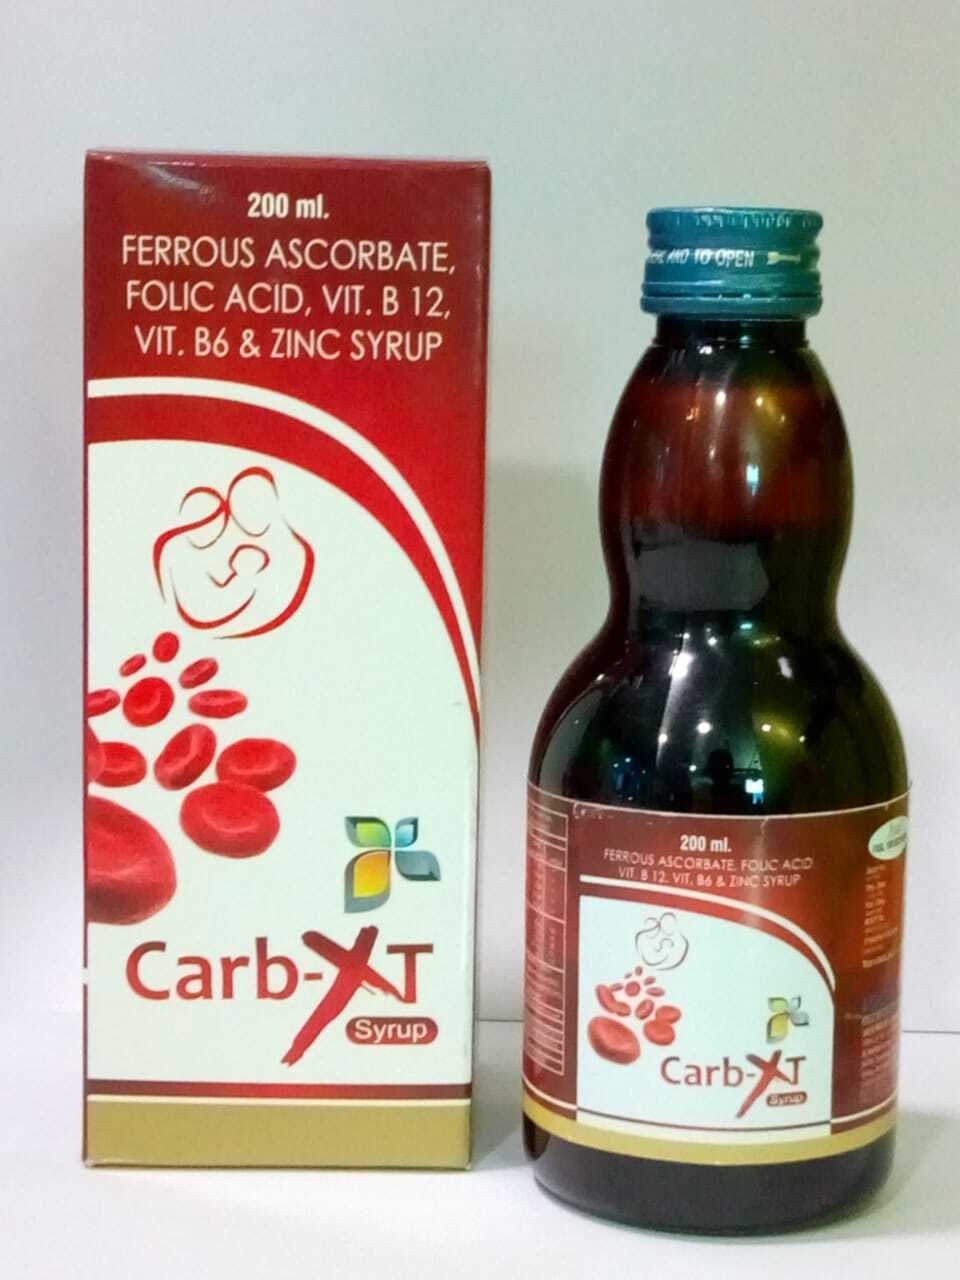 Carb-XT Syrup